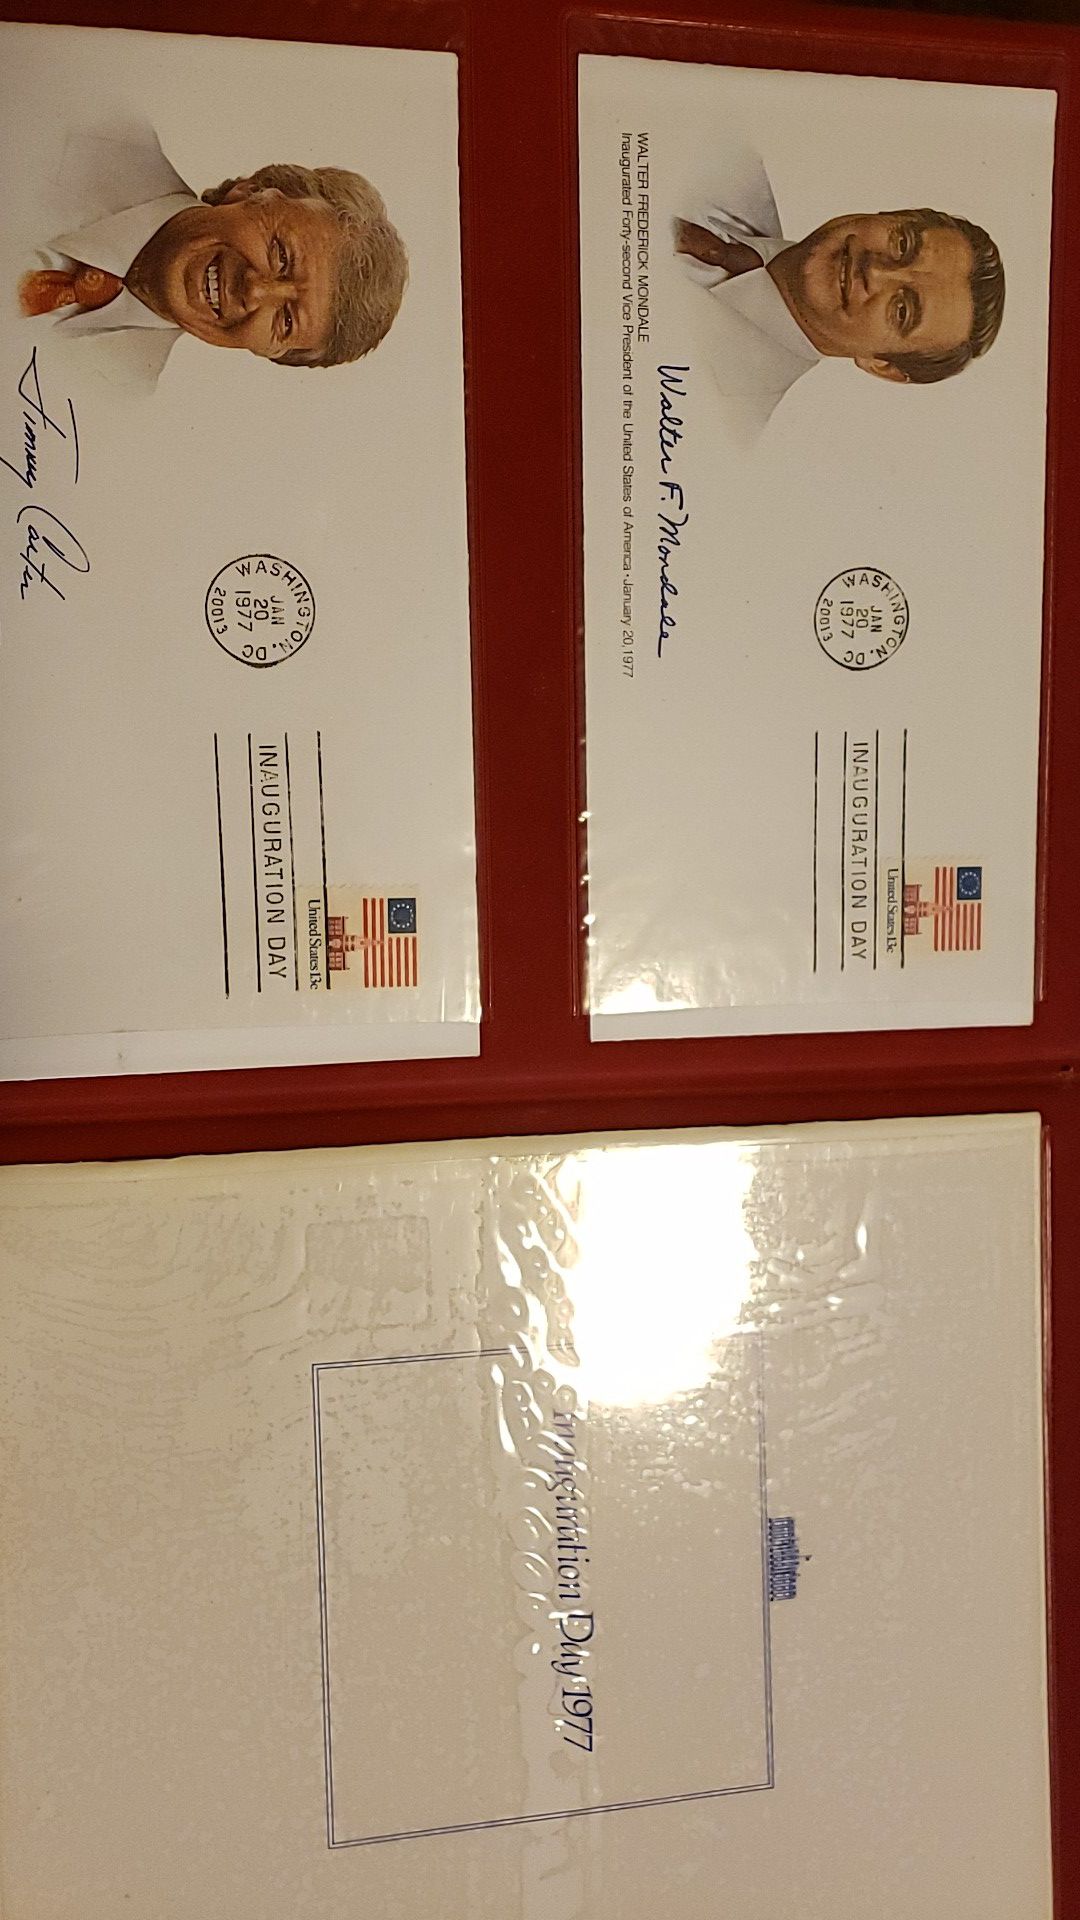 Jimmy Carter and Walter Mondale signed inauguration envelopes and inauguration program